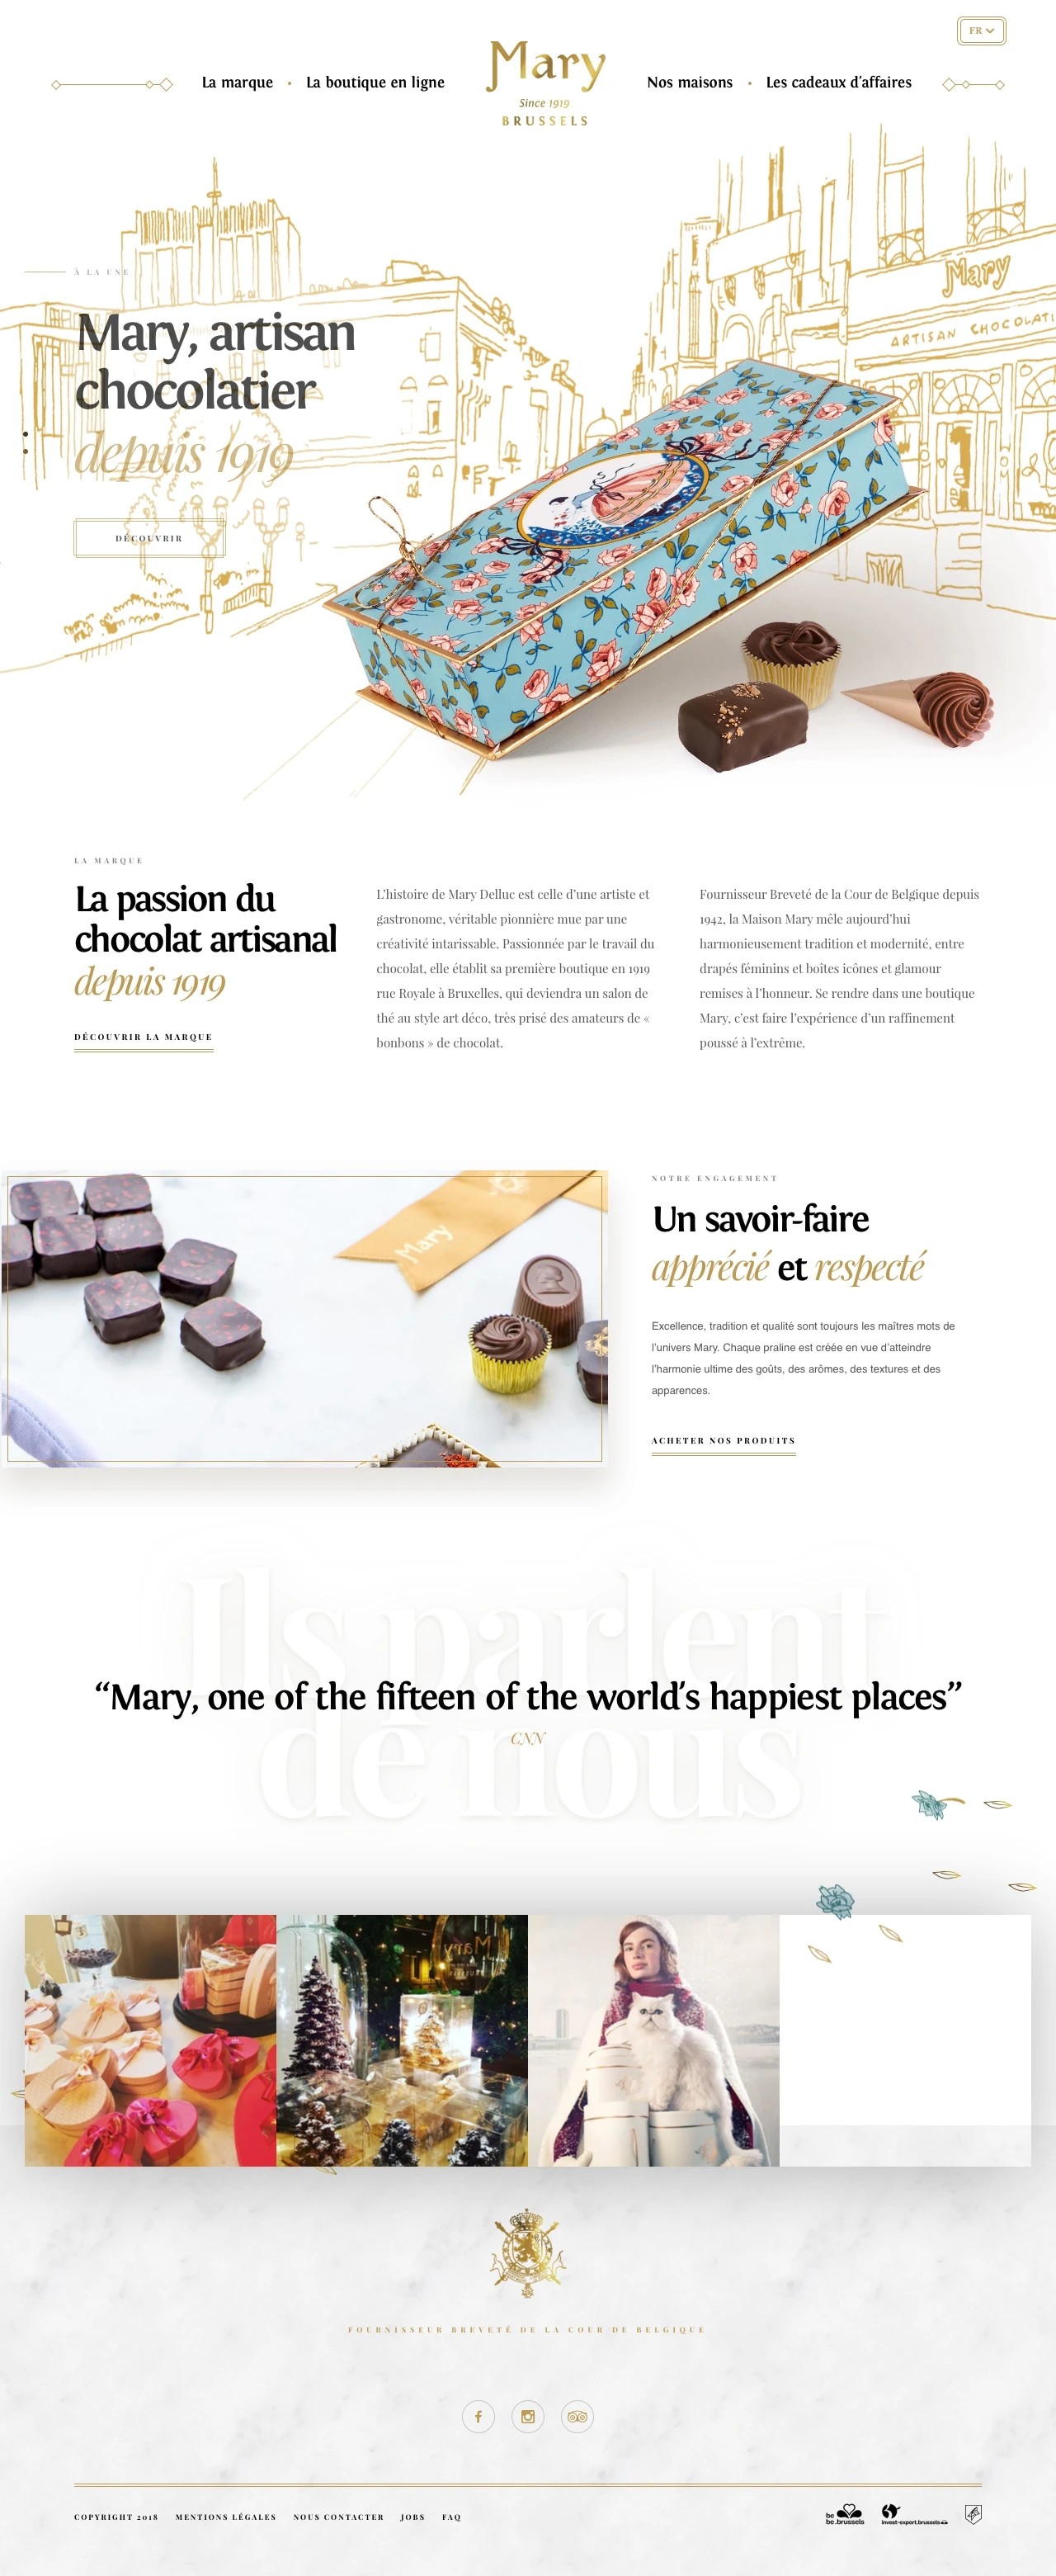 Mary Landing Page Example: 1919, Mary Delluc, passionate about chocolate, wishes you to discover her creations.